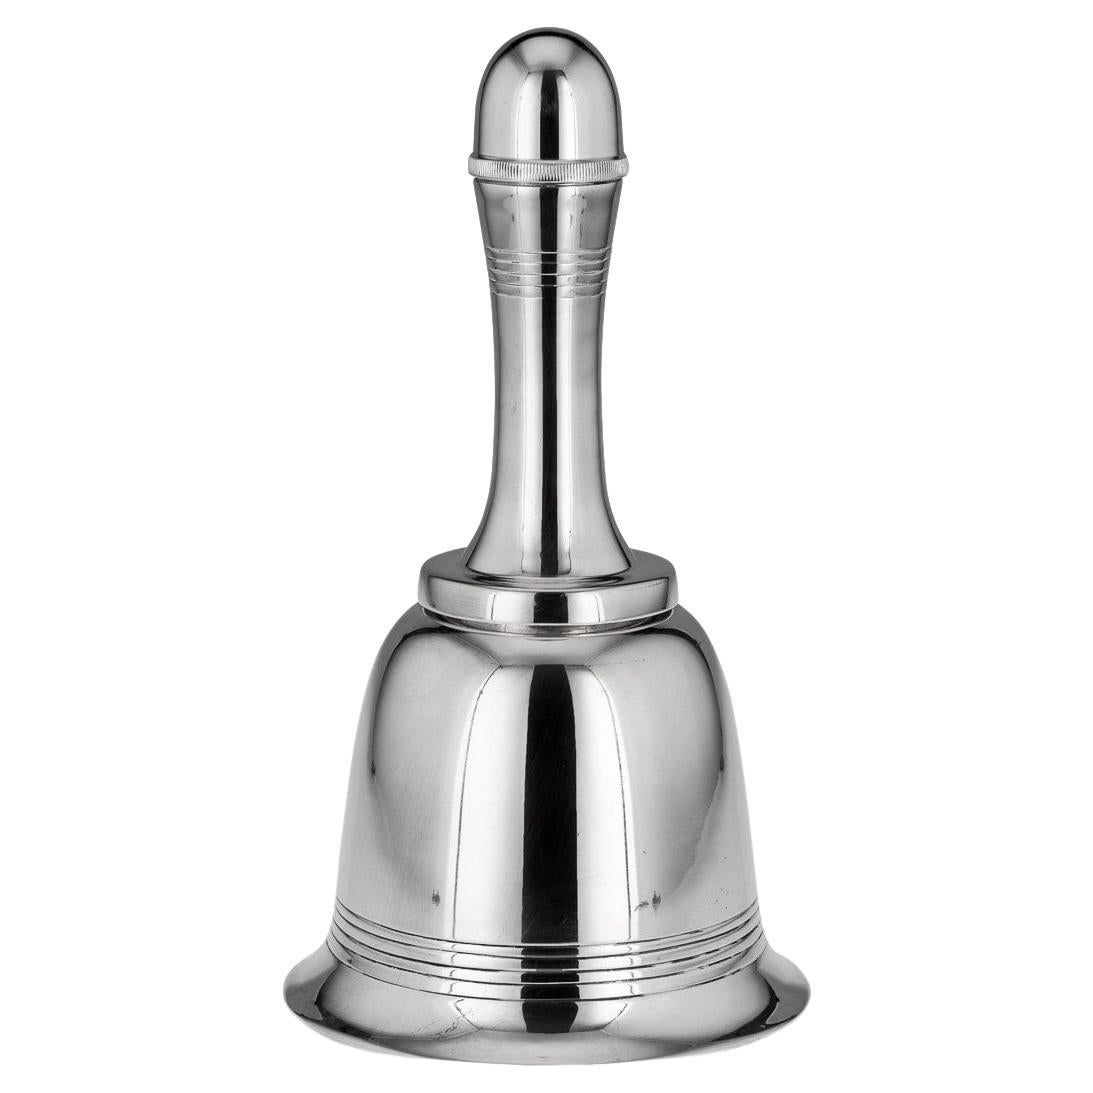 20th Century Silver Plated "Bell-Form" Cocktail Shaker, Mappin & Webb, c.1930